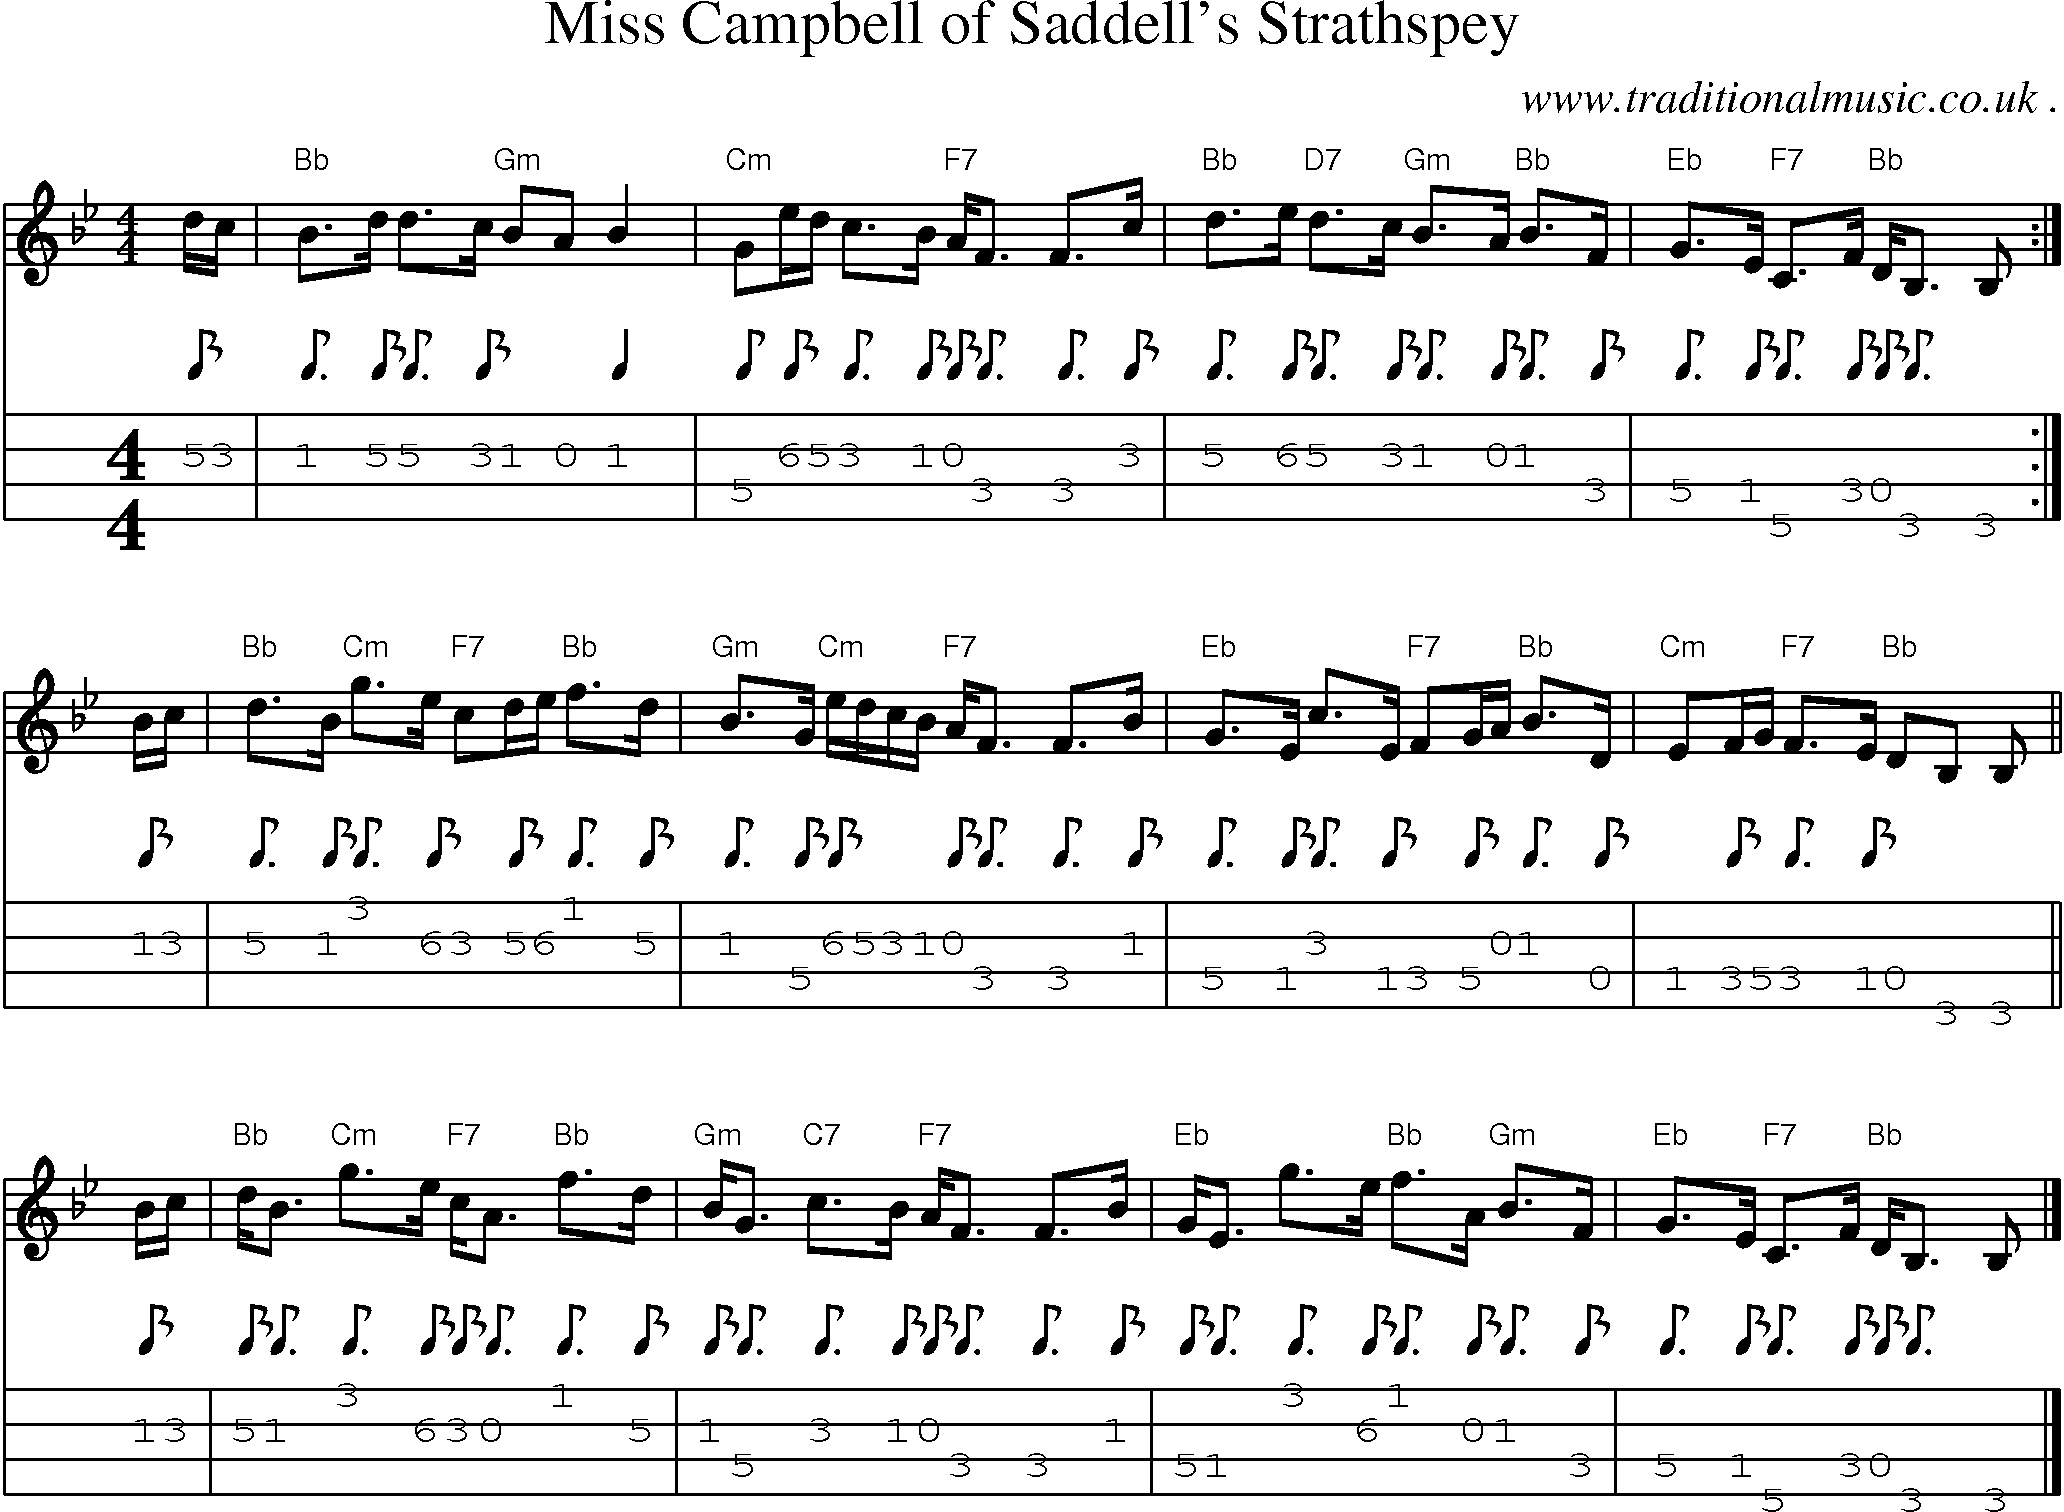 Sheet-music  score, Chords and Mandolin Tabs for Miss Campbell Of Saddells Strathspey